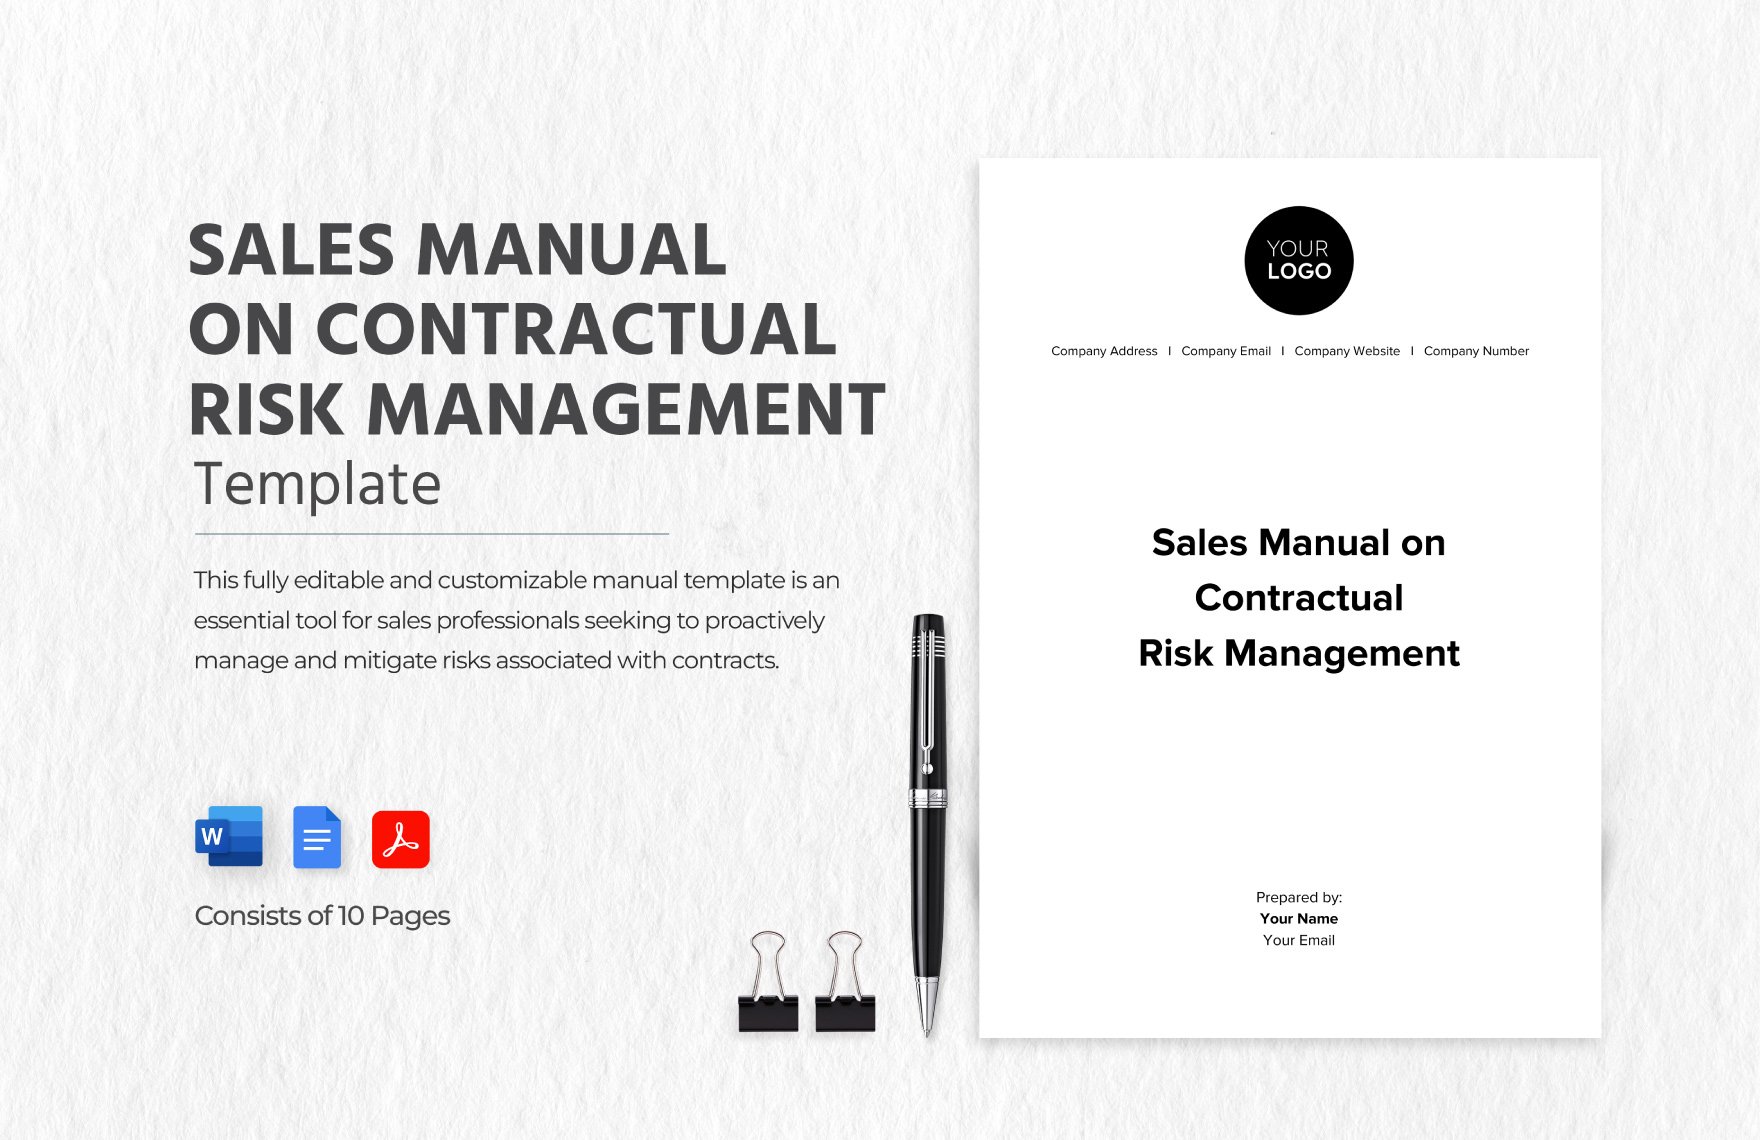 Sales Manual on Contractual Risk Management Template